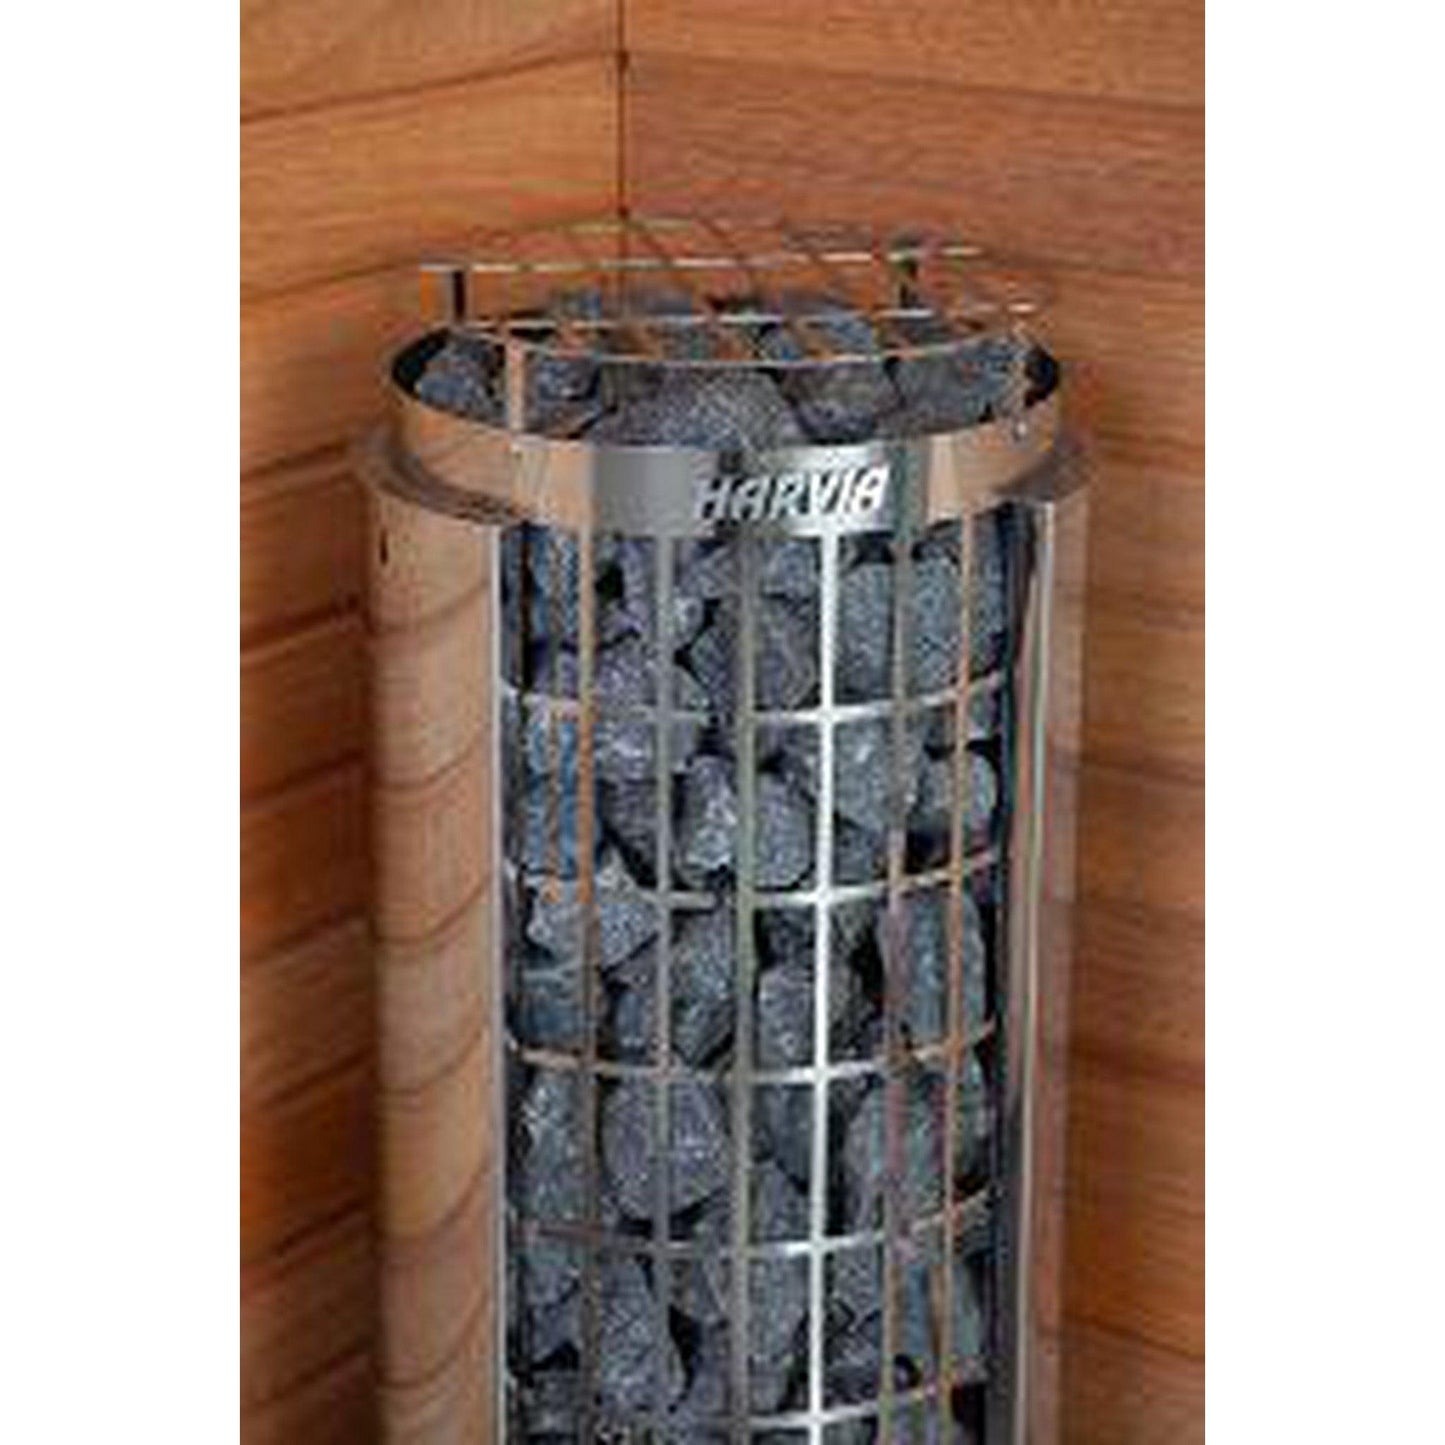 Harvia Cilindro Half Series 10.5 kW 240V 1PH Freestanding Stainless Steel Electric Sauna Heater